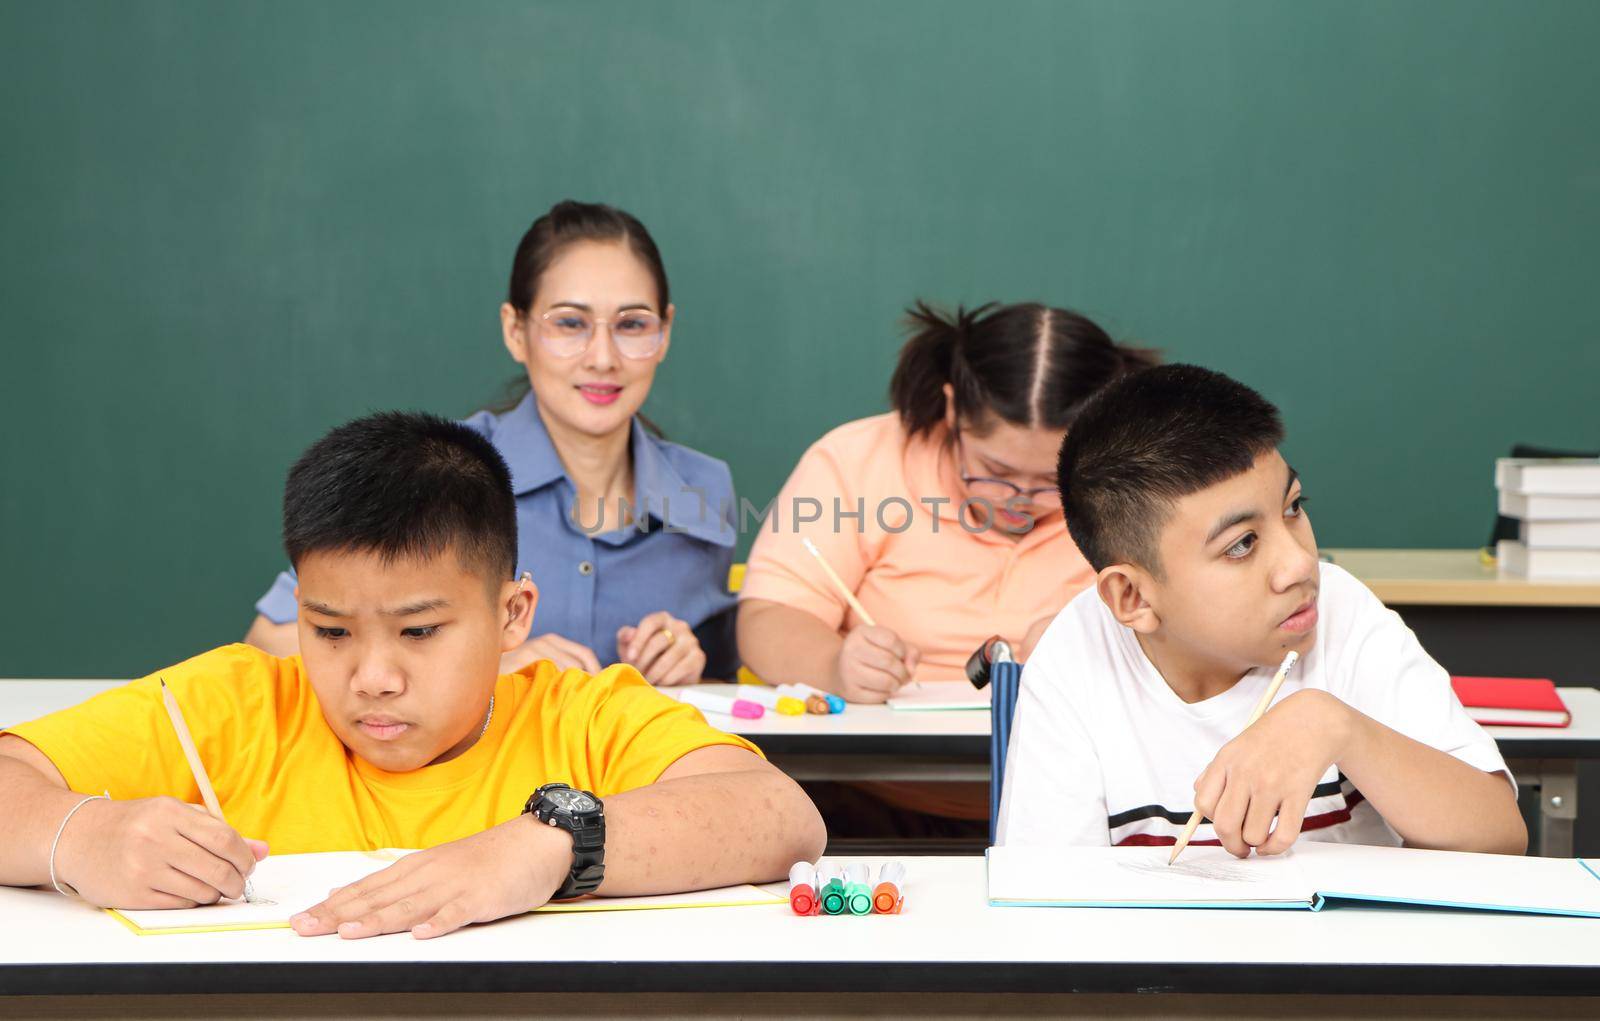 Asian disabled children Or, an autistic child learns to read, write, and train their hand and finger muscles with a teacher at their classroom desk. Concentrate and smile Happy disability kid concept